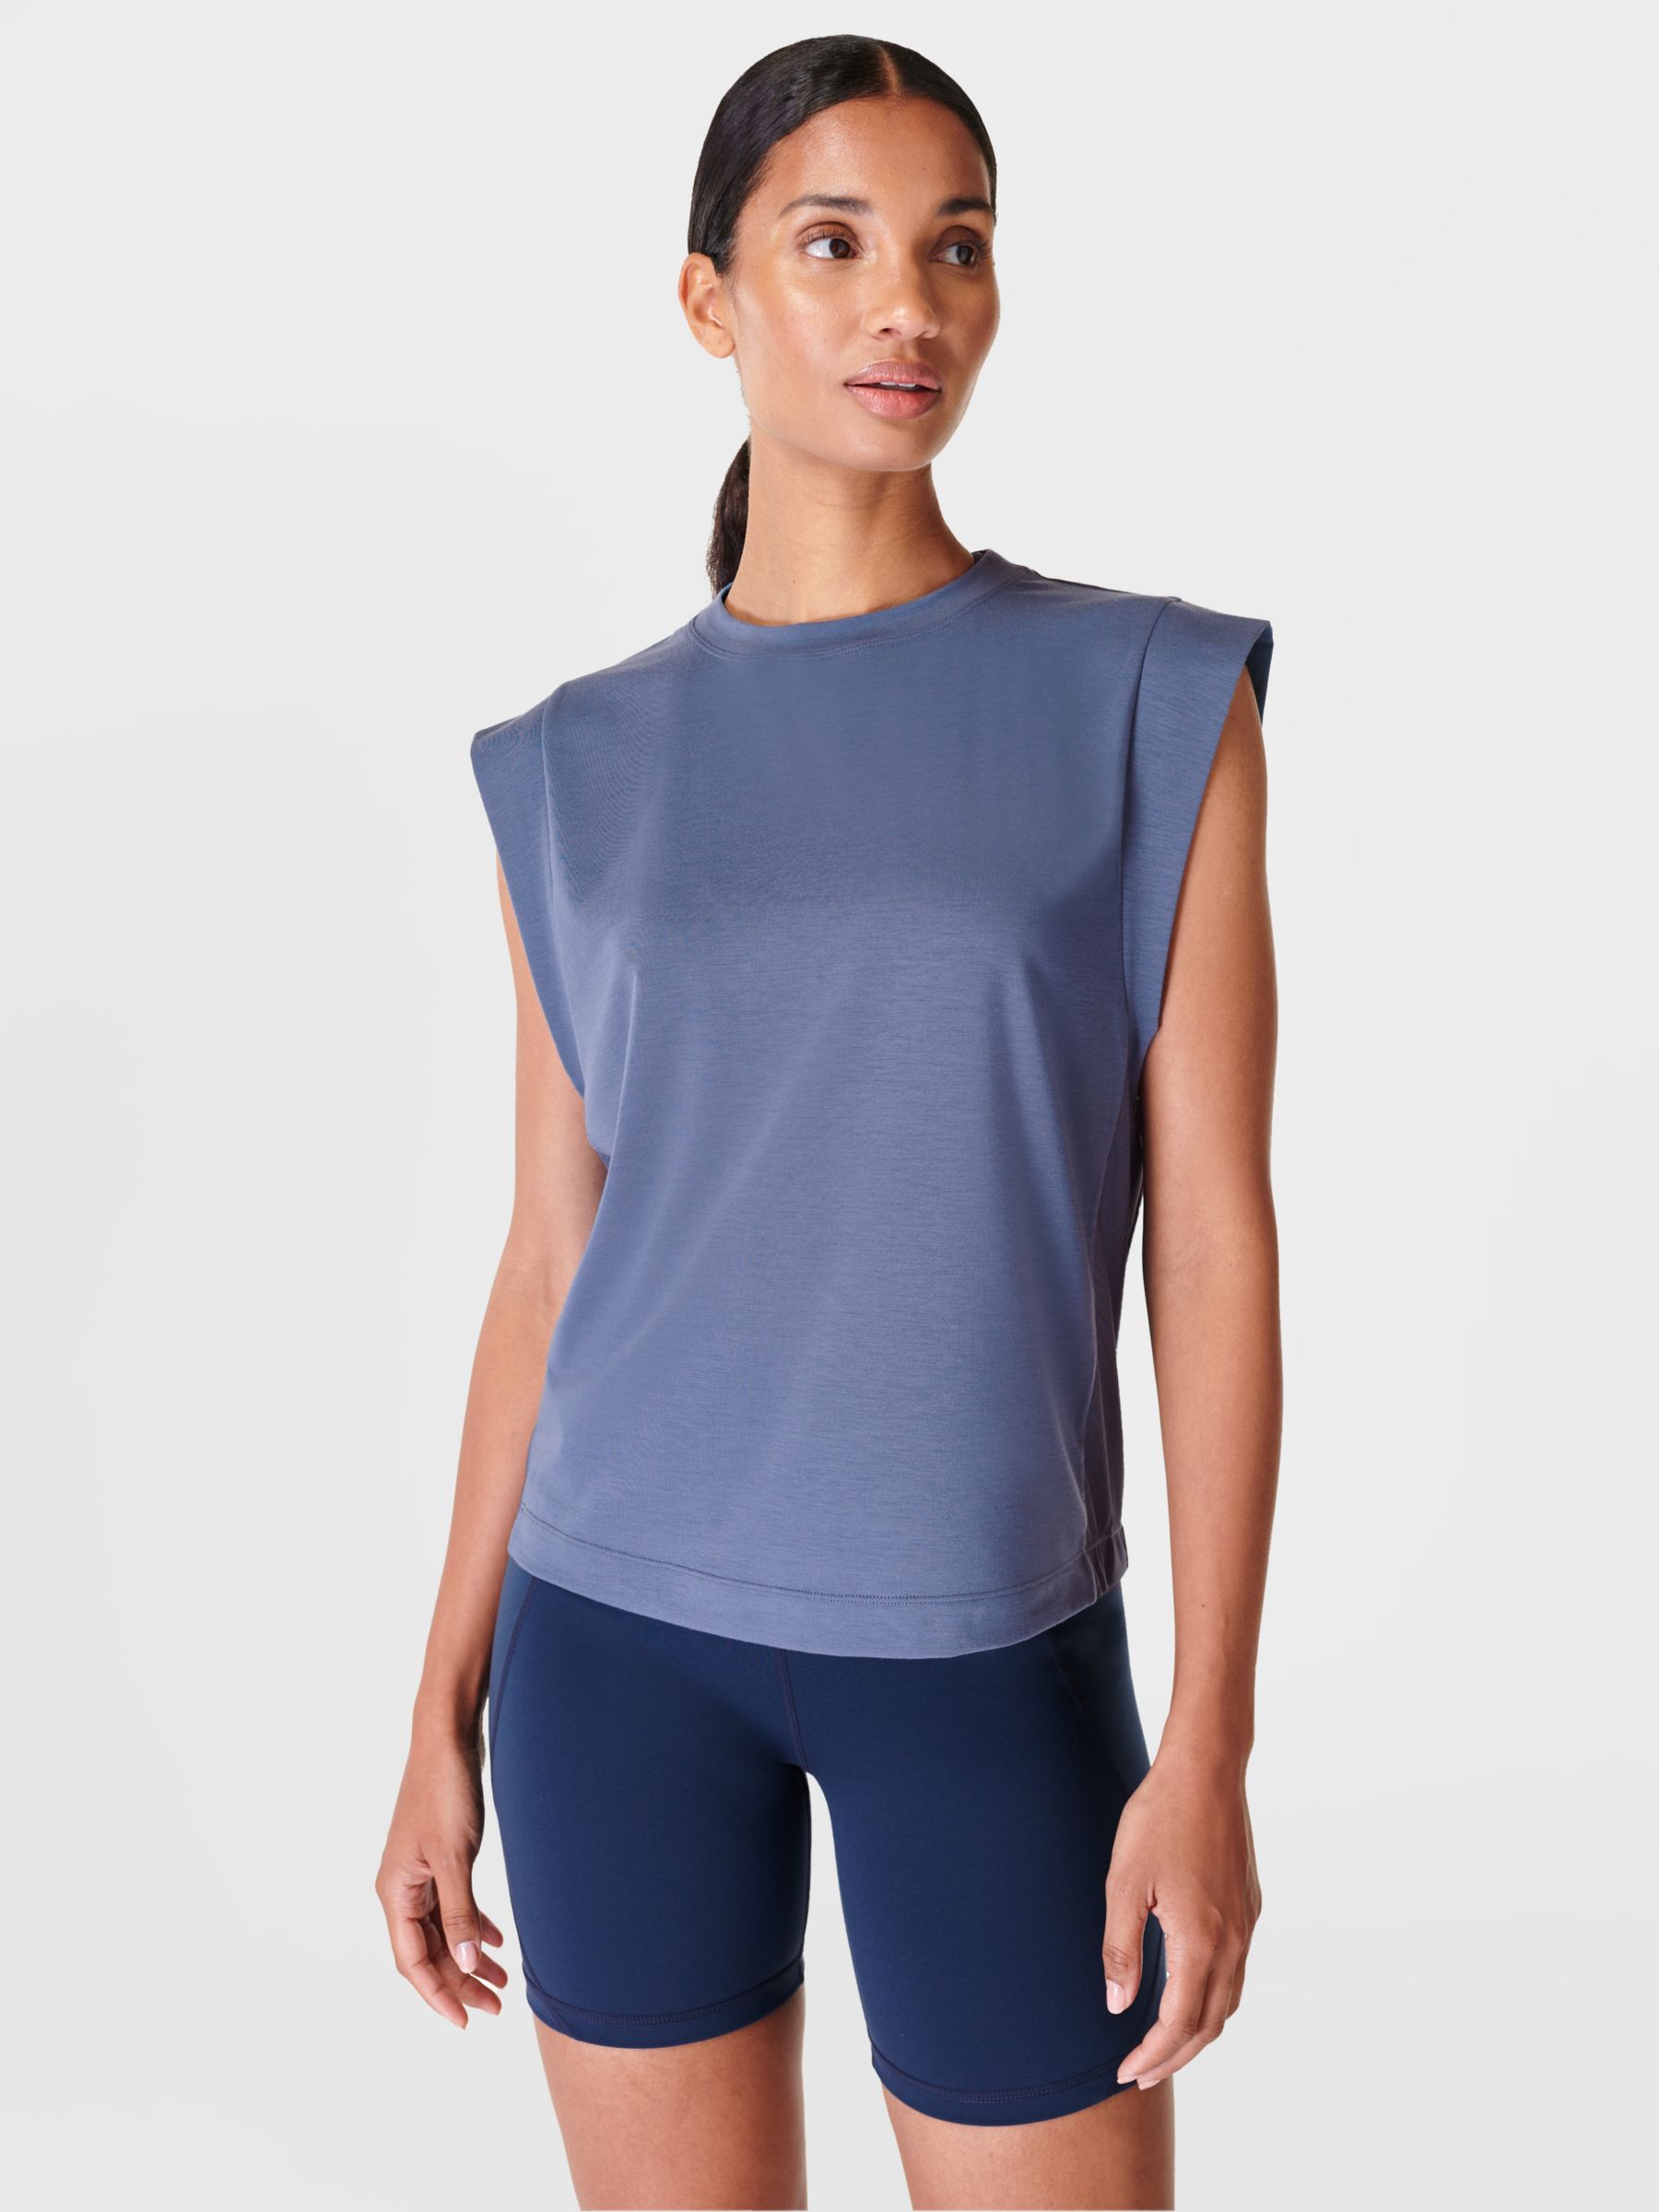 Peloton Apparel Women's Top S Grey Cotton with Polyester Basic